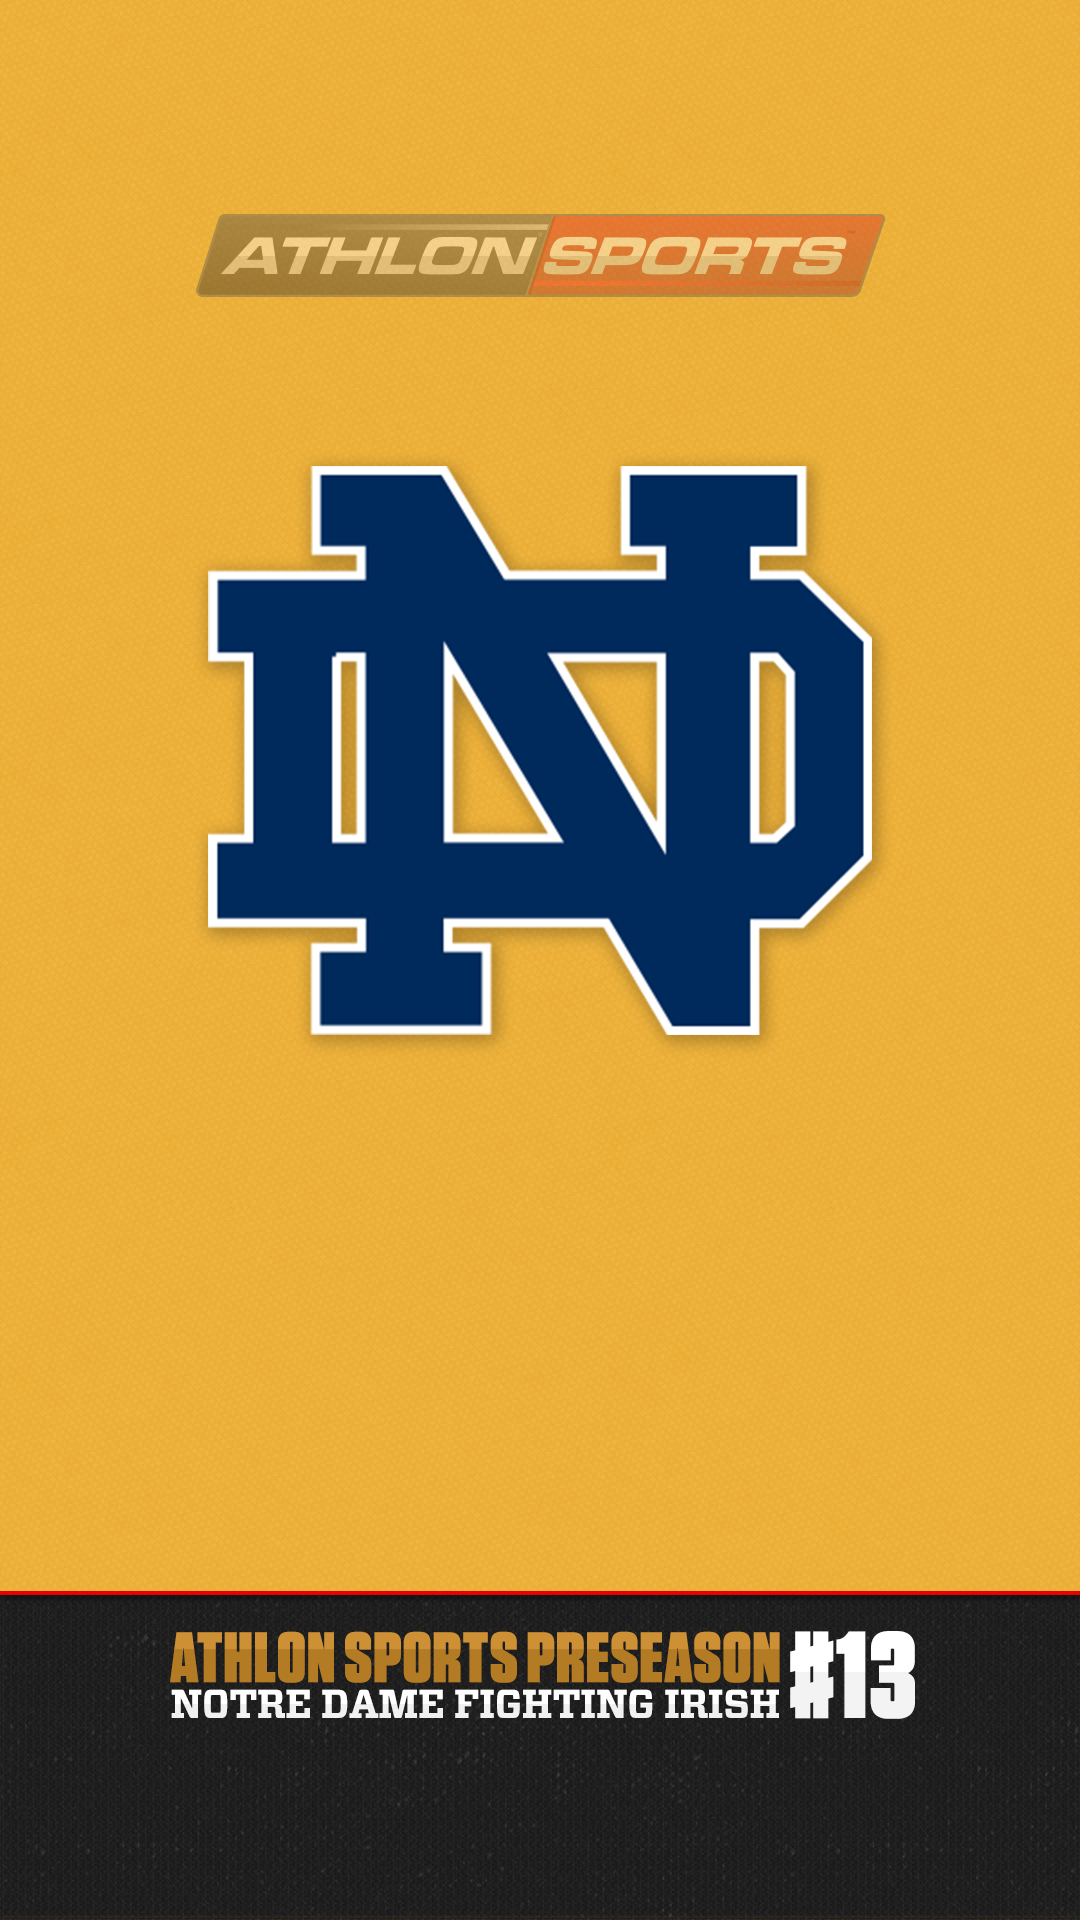 2014 College Football Rankings: #13 Notre Dame | AthlonSports.com